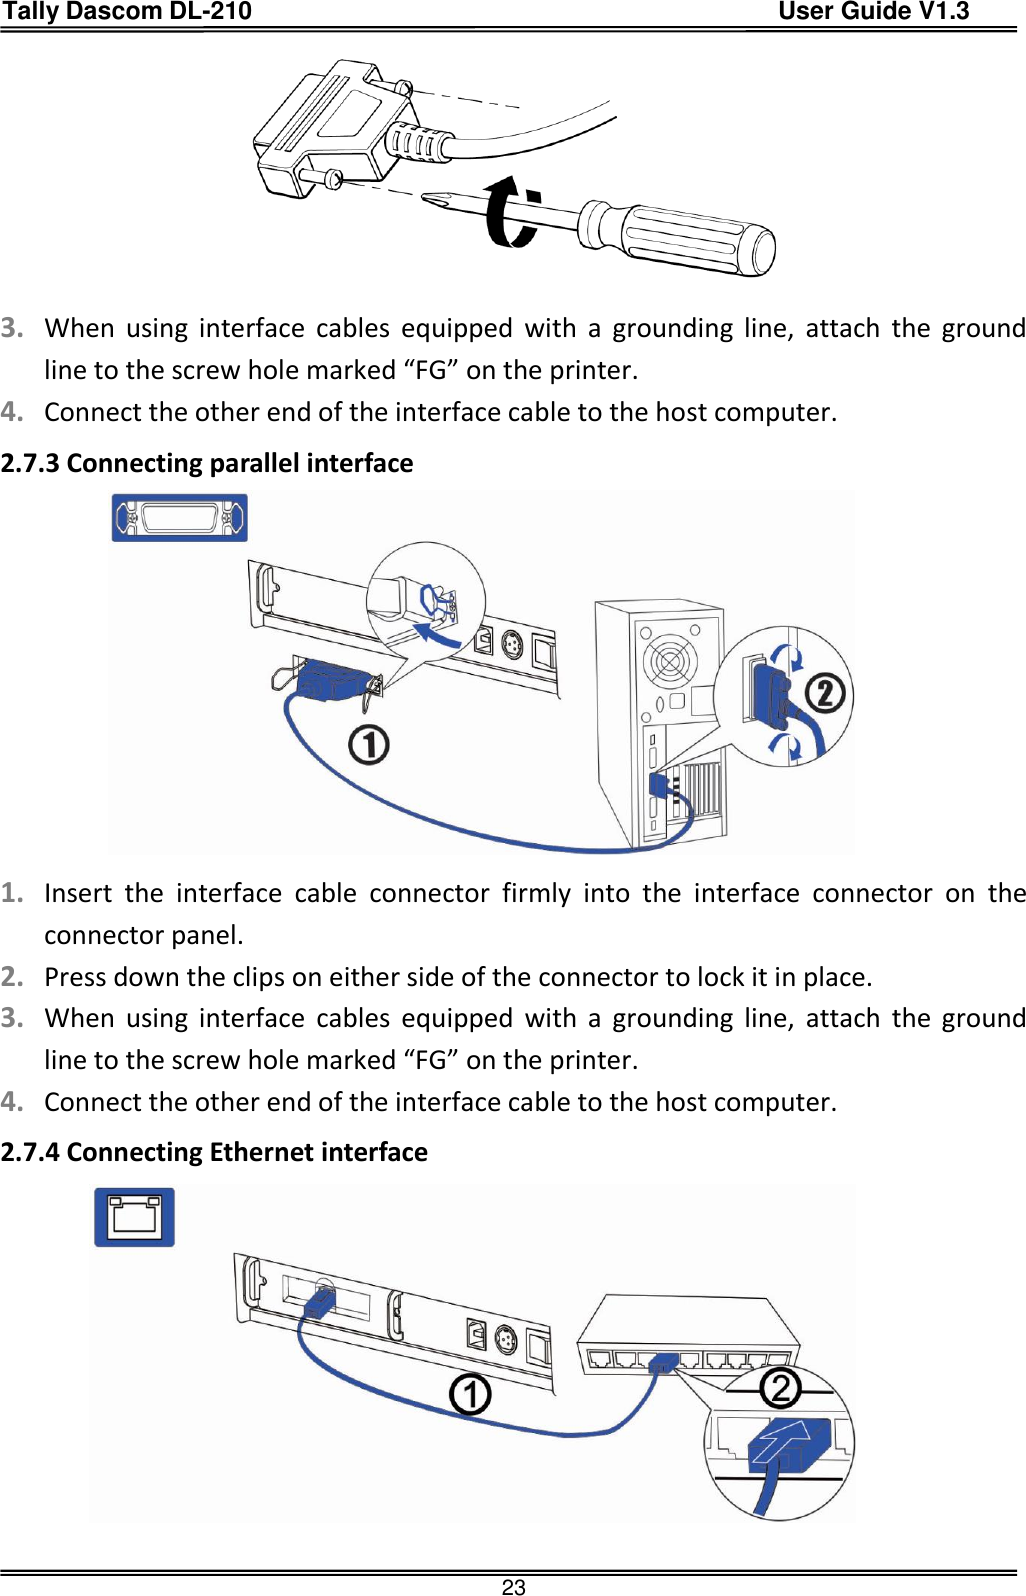 Tally Dascom DL-210                                          User Guide V1.3  23   3. When  using  interface  cables  equipped  with  a  grounding  line,  attach  the  ground line to the screw hole marked “FG” on the printer. 4. Connect the other end of the interface cable to the host computer. 2.7.3 Connecting parallel interface                1. Insert  the  interface  cable  connector  firmly  into  the  interface  connector  on  the connector panel. 2. Press down the clips on either side of the connector to lock it in place. 3. When  using  interface  cables equipped  with  a  grounding line,  attach  the  ground line to the screw hole marked “FG” on the printer. 4. Connect the other end of the interface cable to the host computer. 2.7.4 Connecting Ethernet interface                